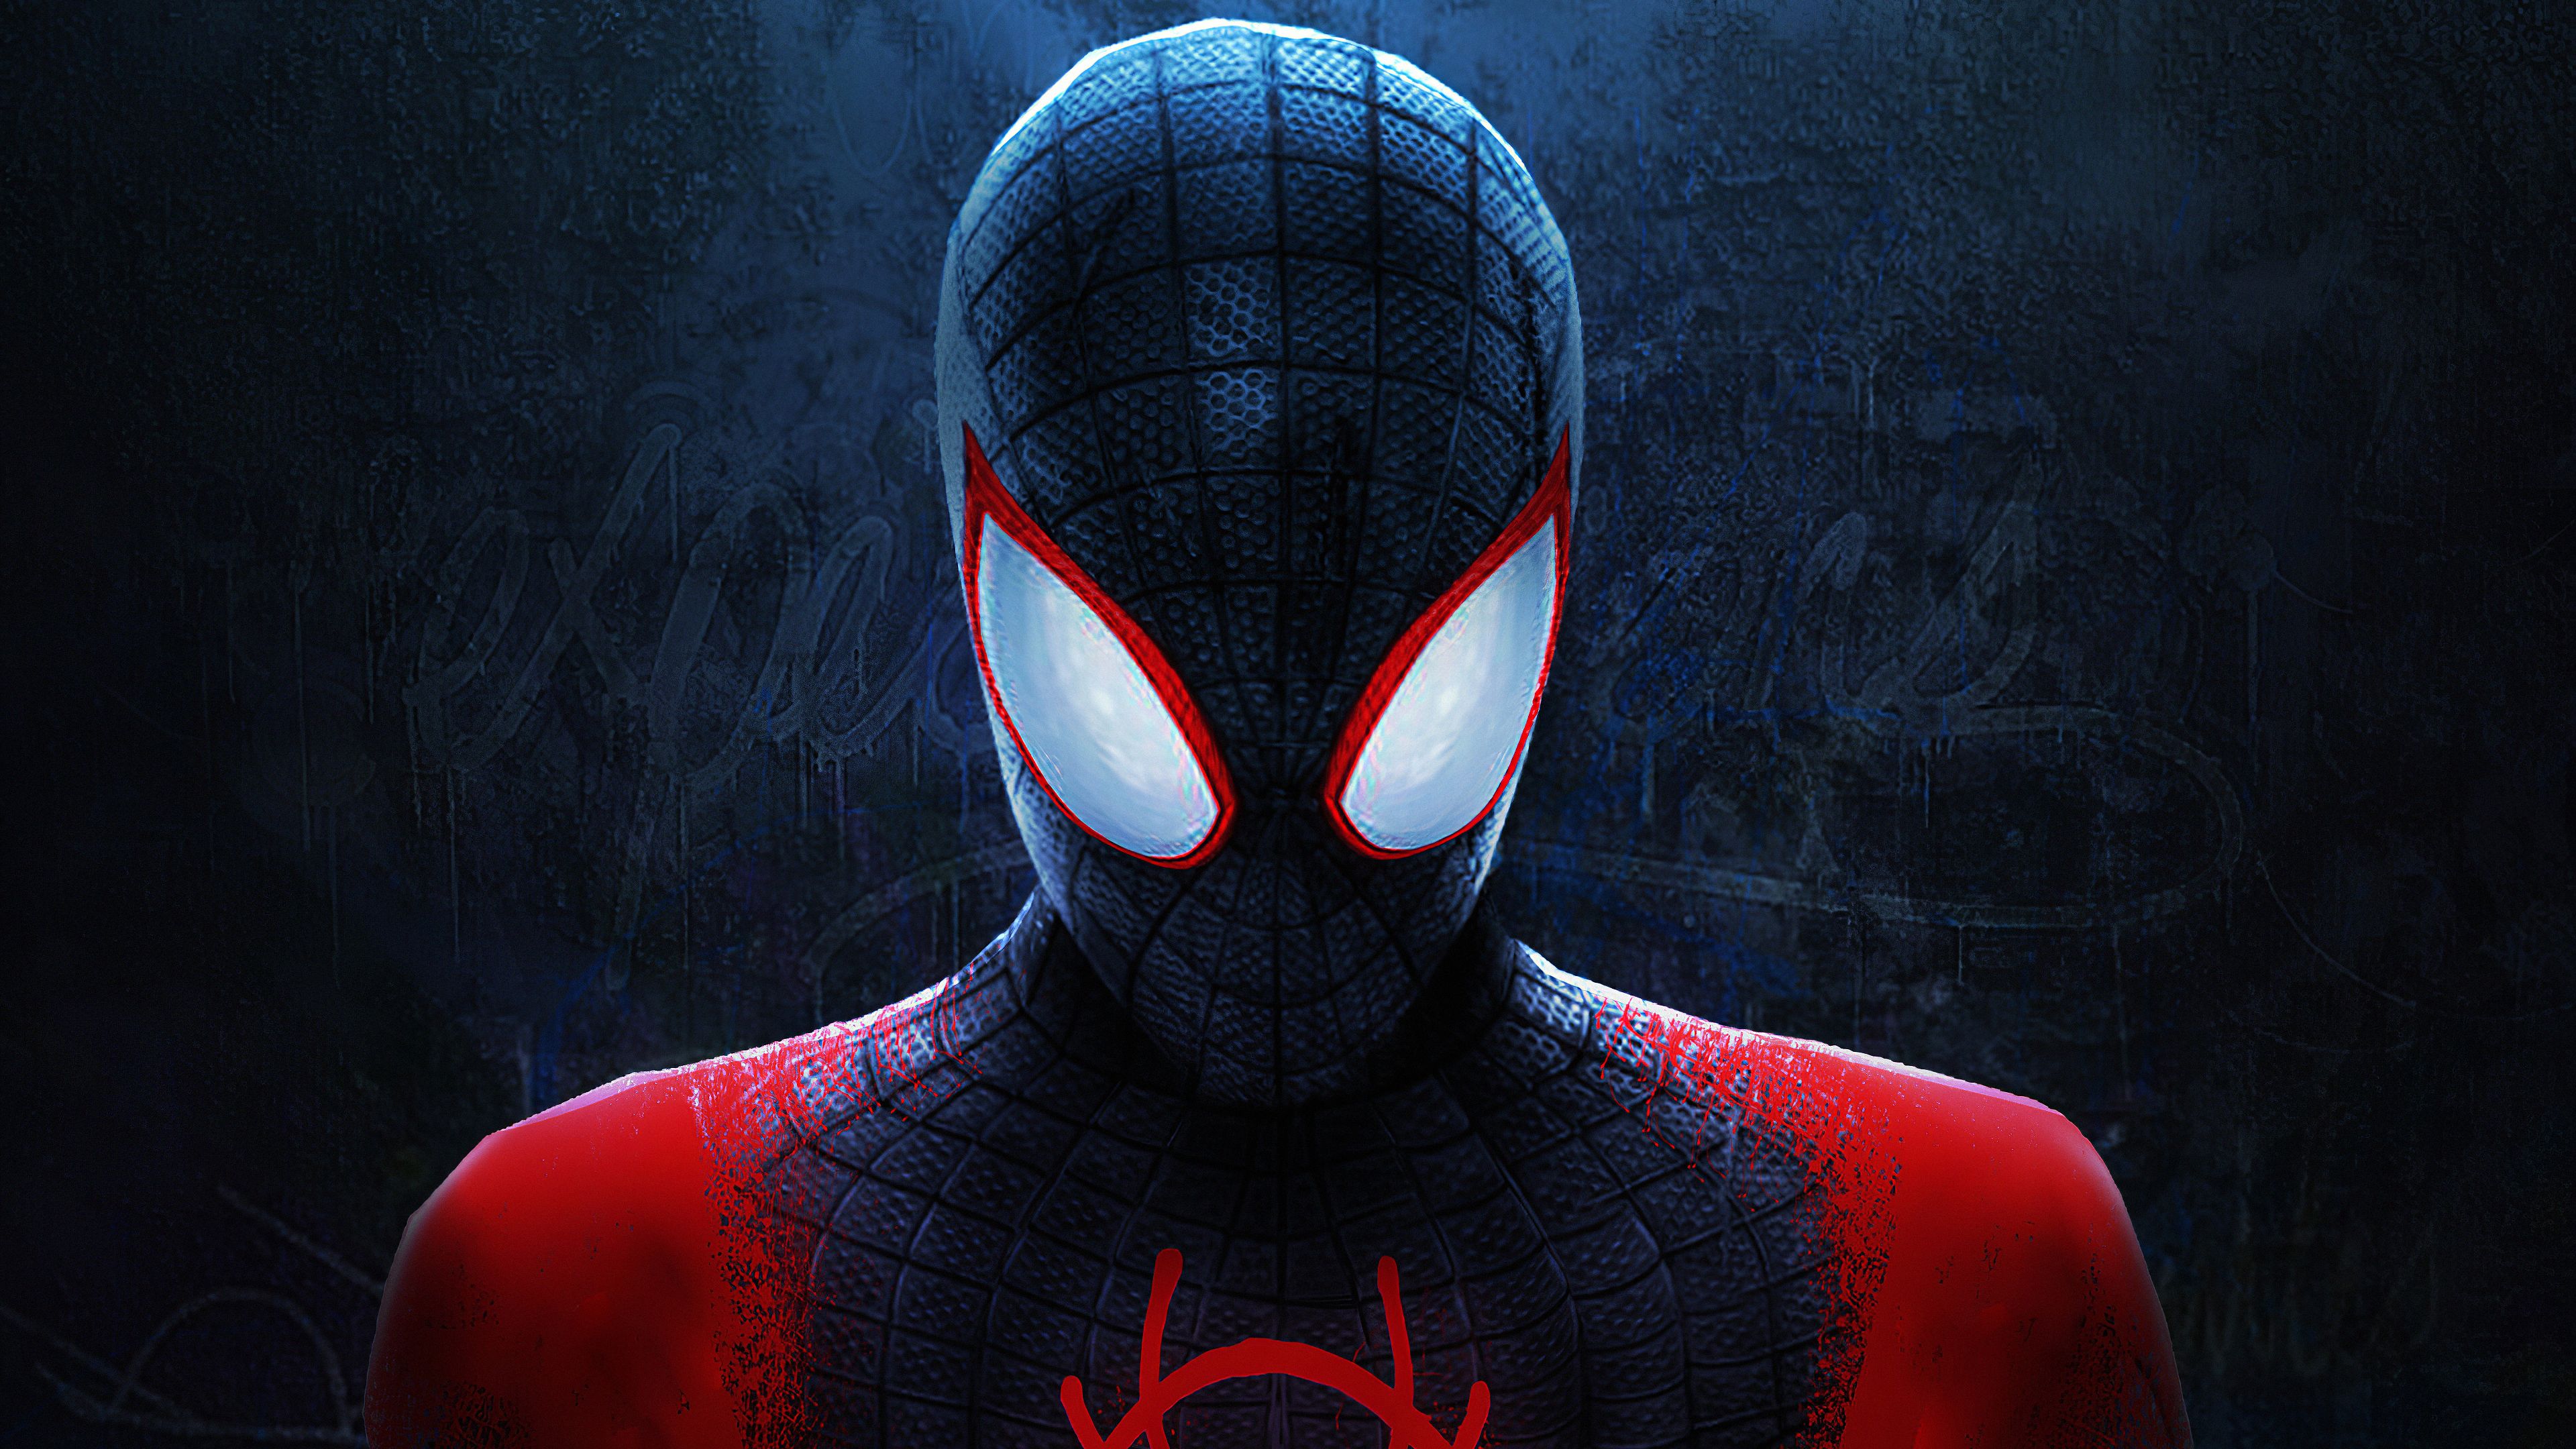 download spider man miles morales game for pc free